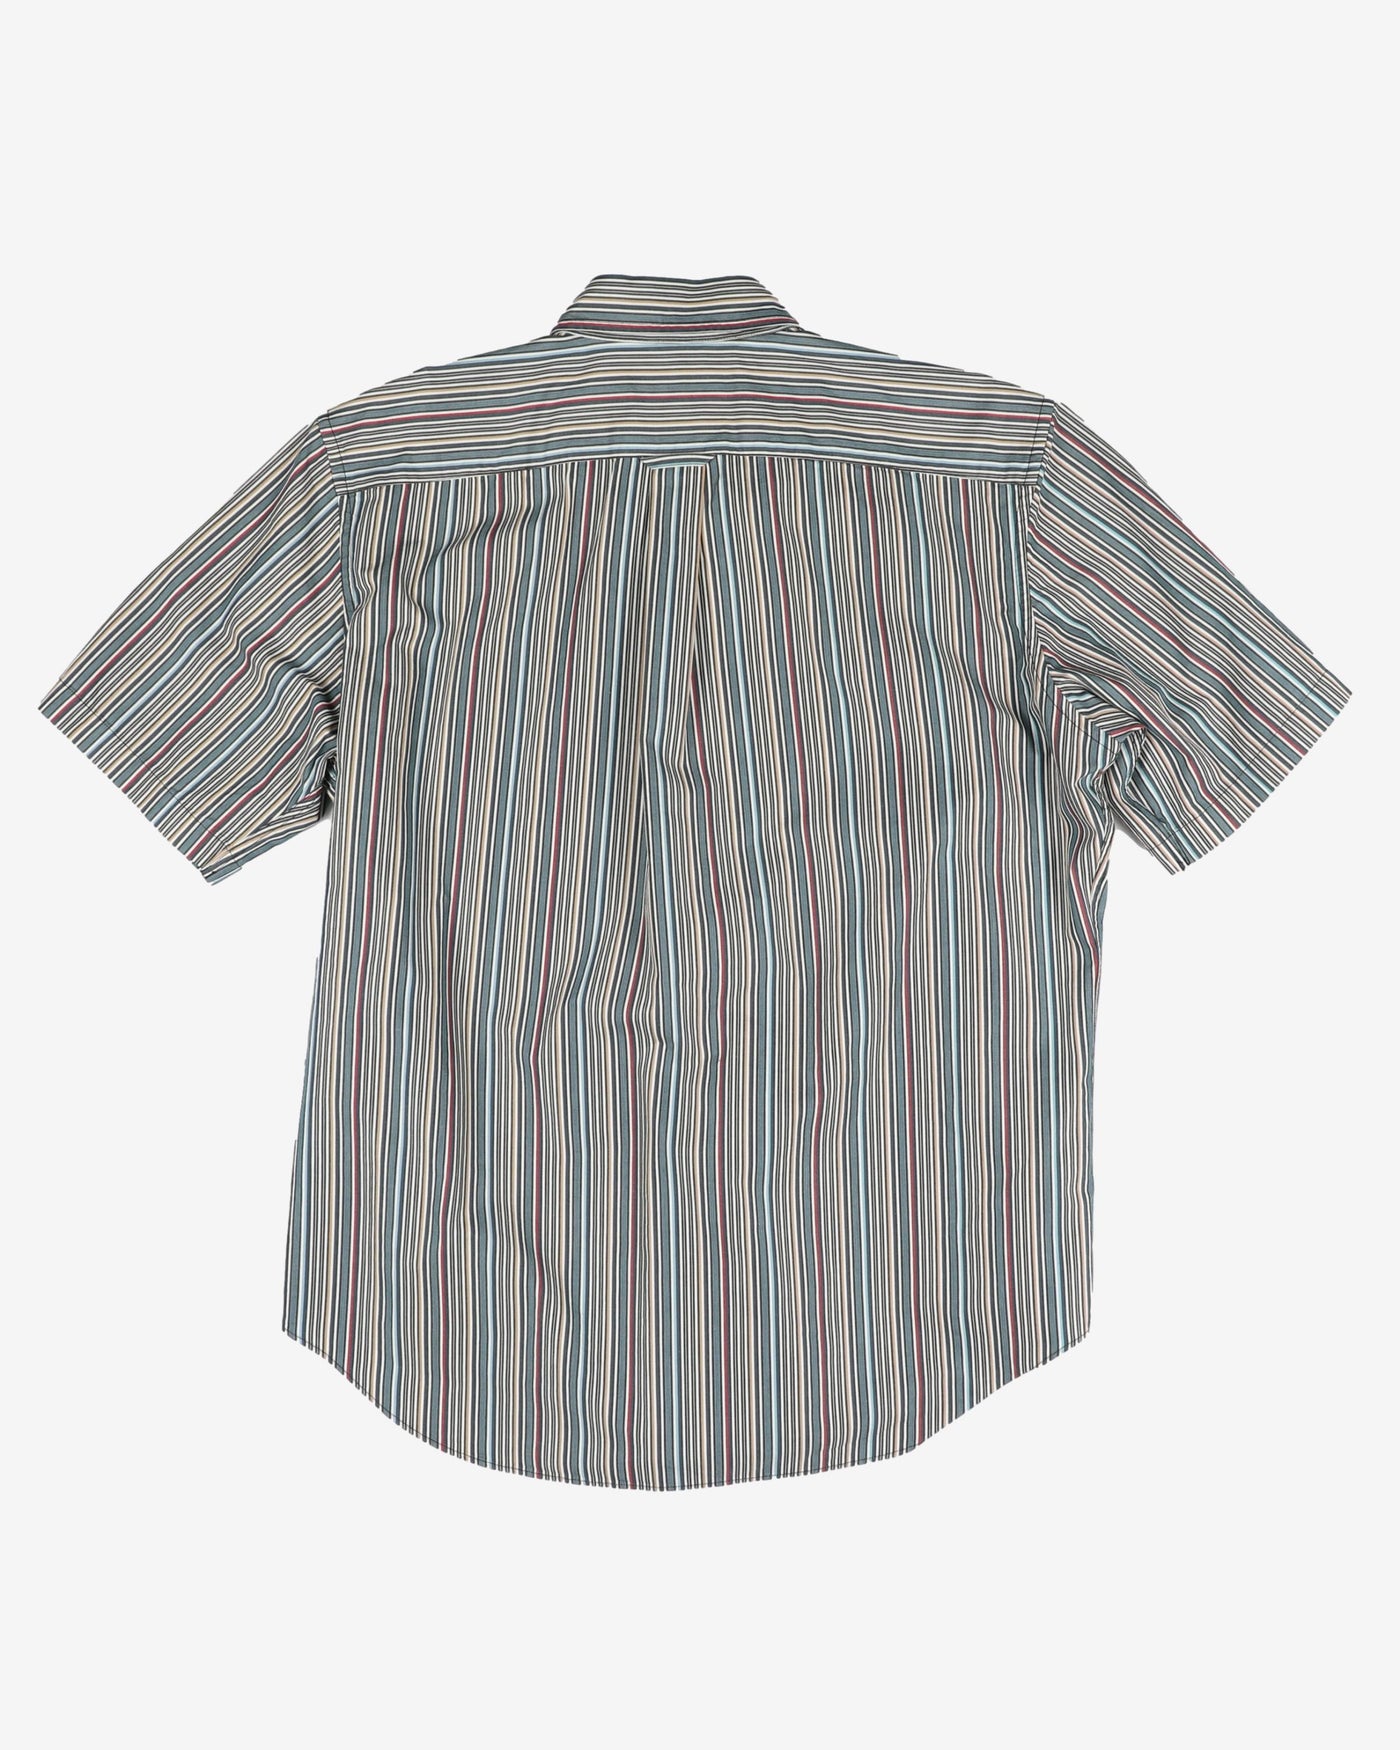 Nautica Striped Patterned Short Sleeve Casual Shirt - L